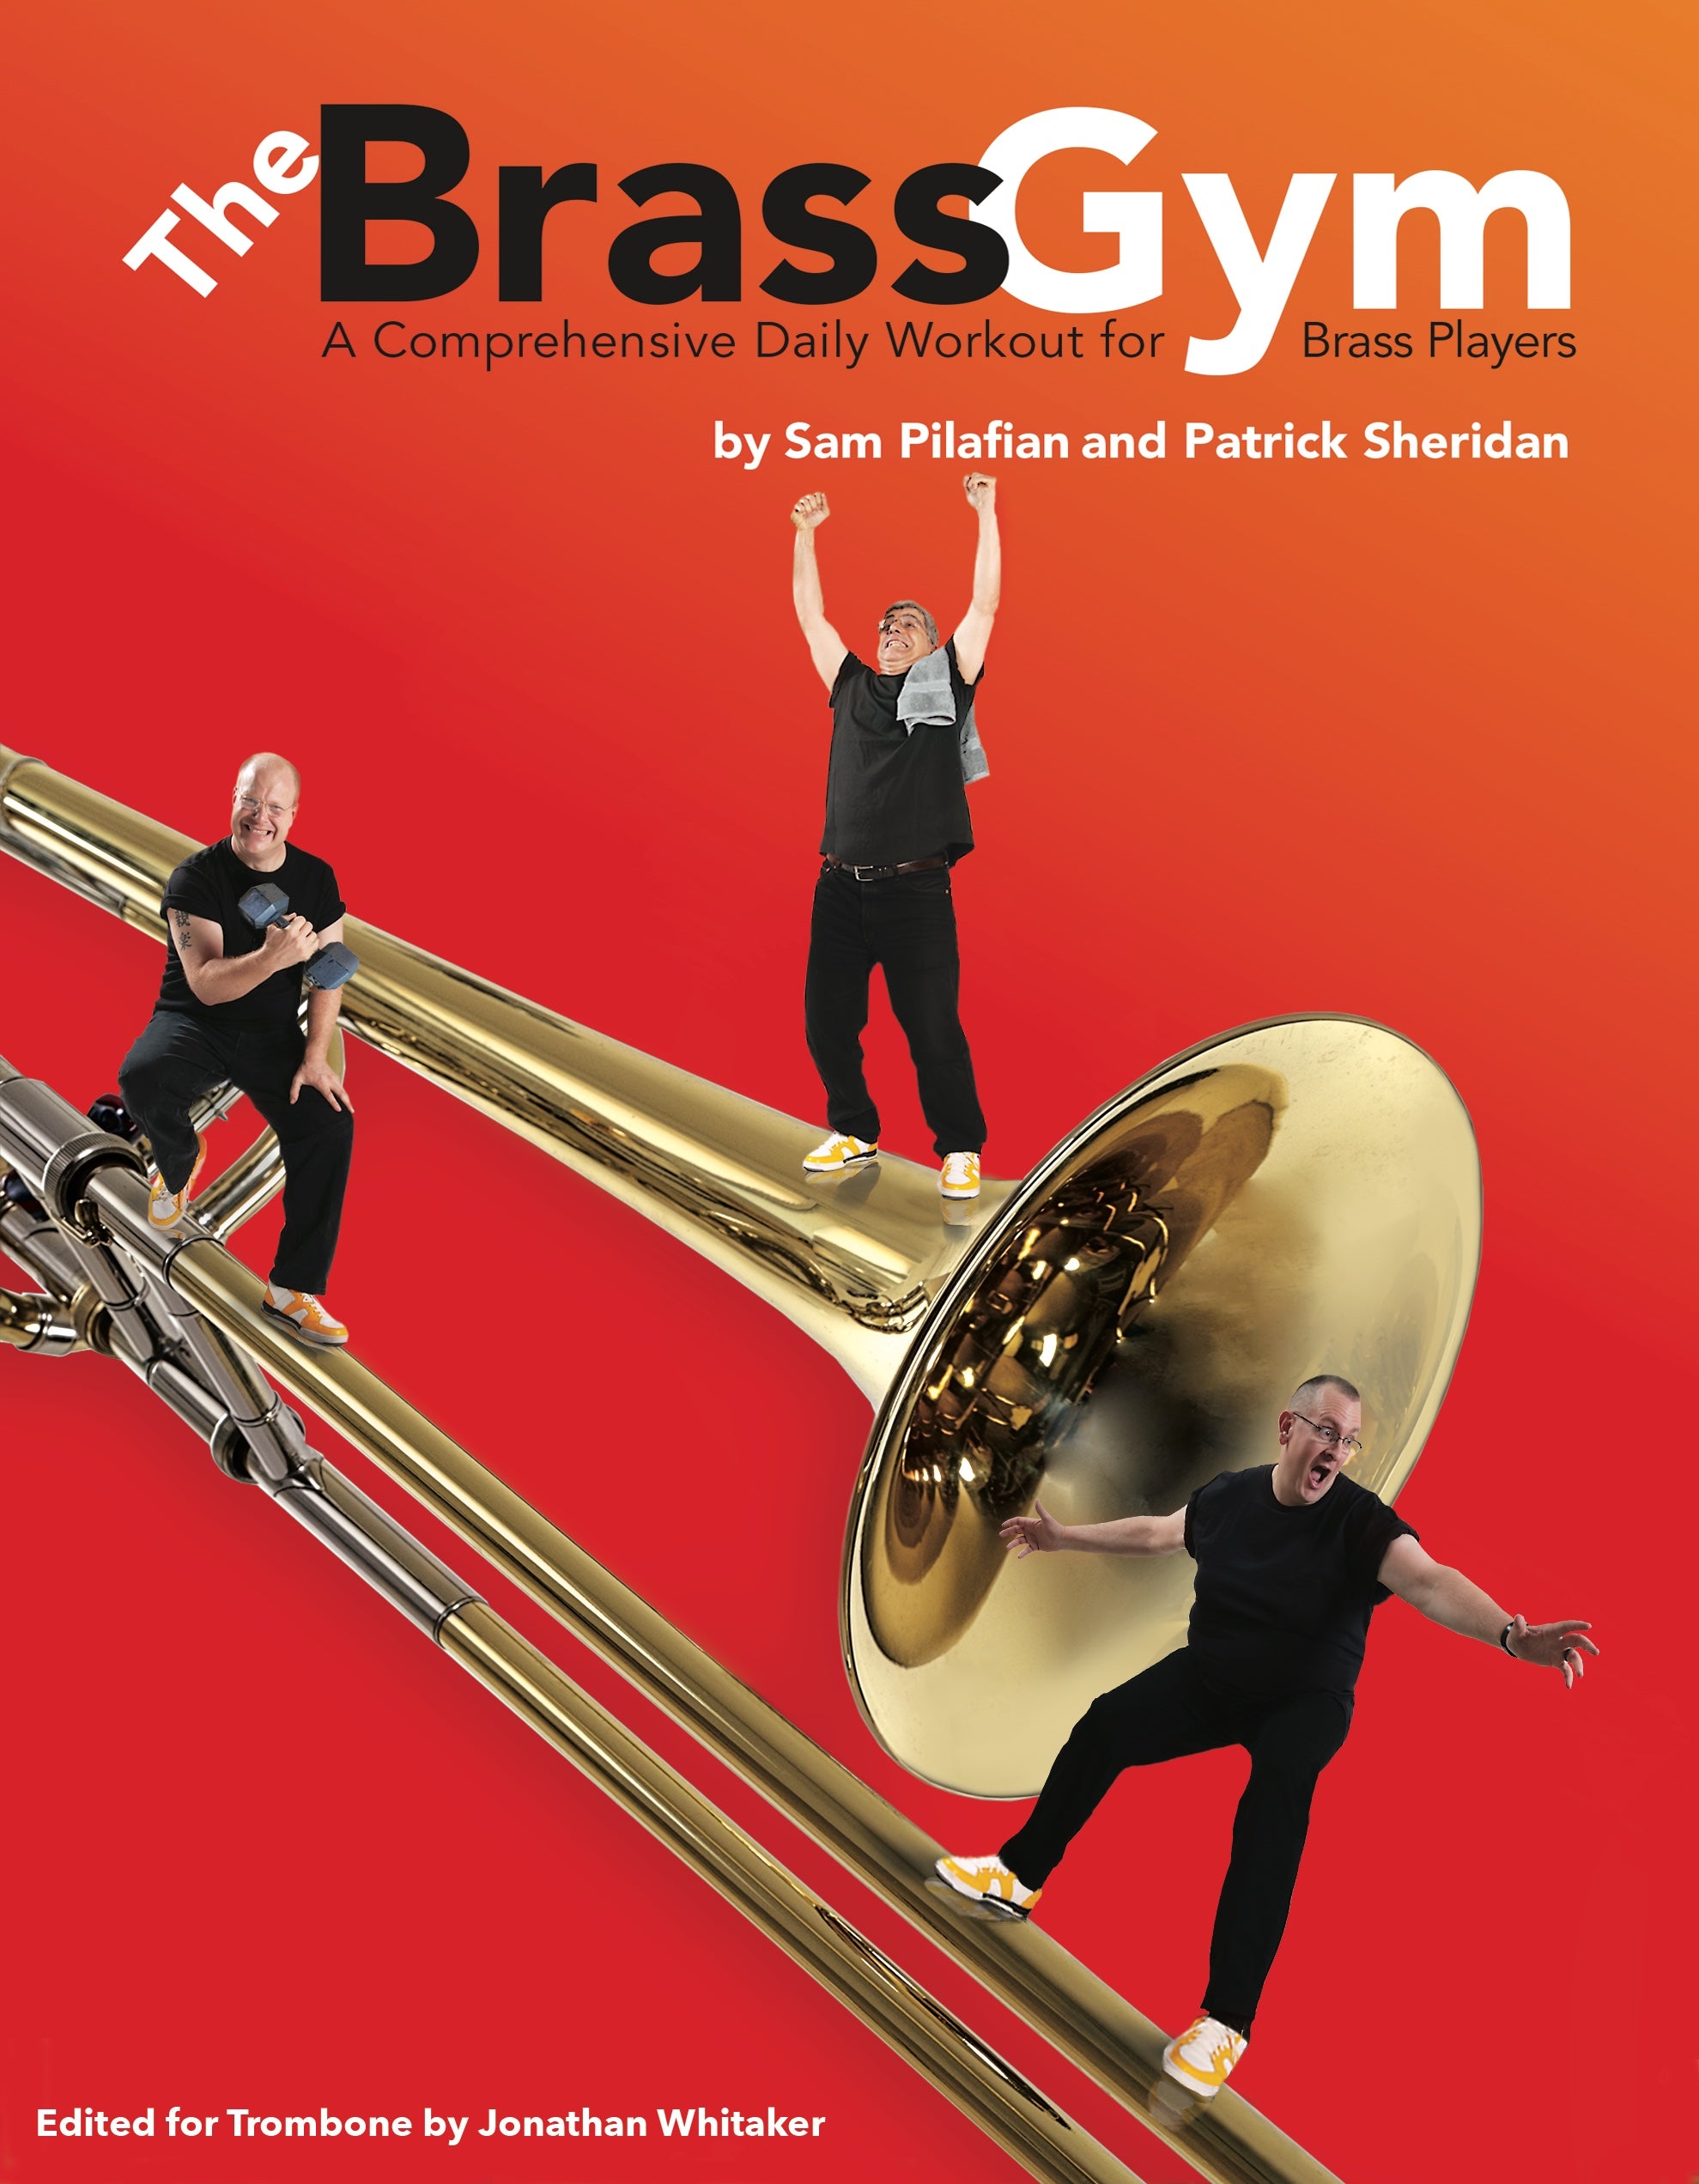 The Brass Gym  Focus On Music